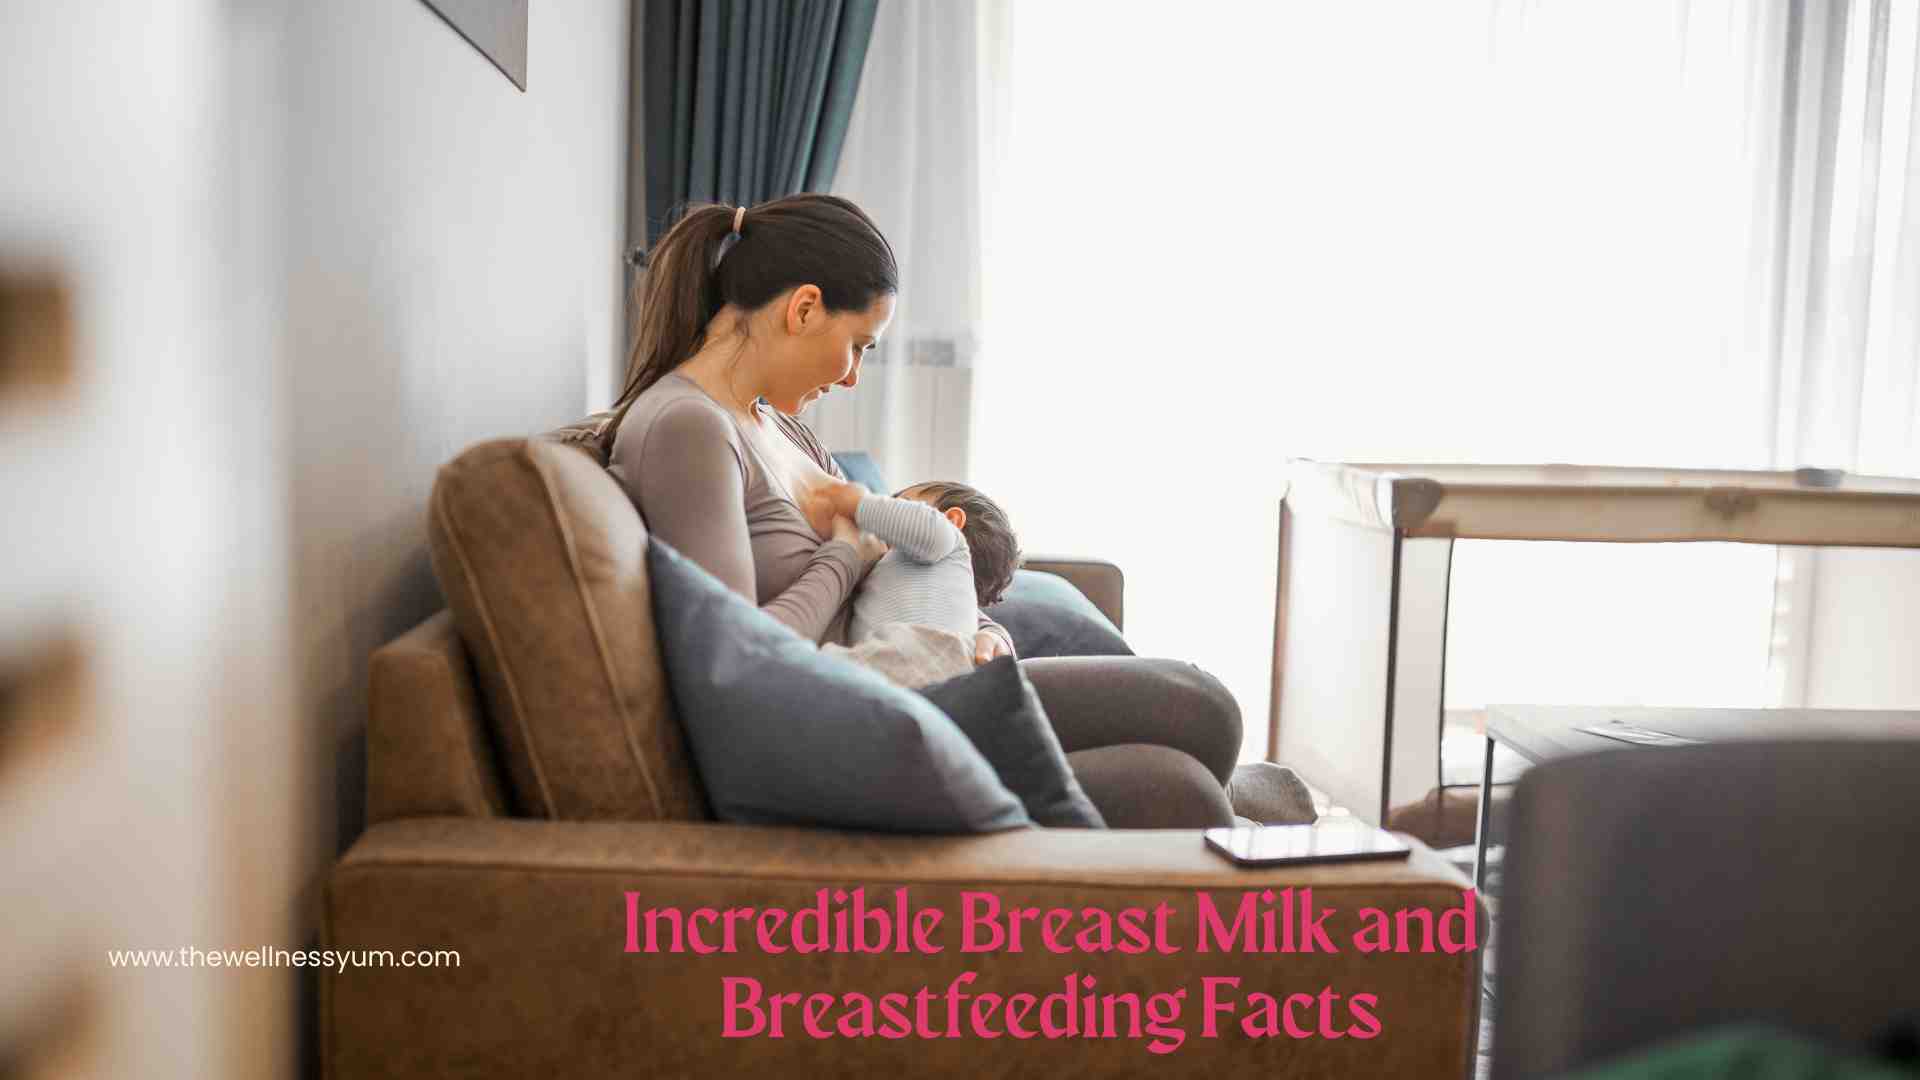 Incredible Breast Milk and Breastfeeding Facts